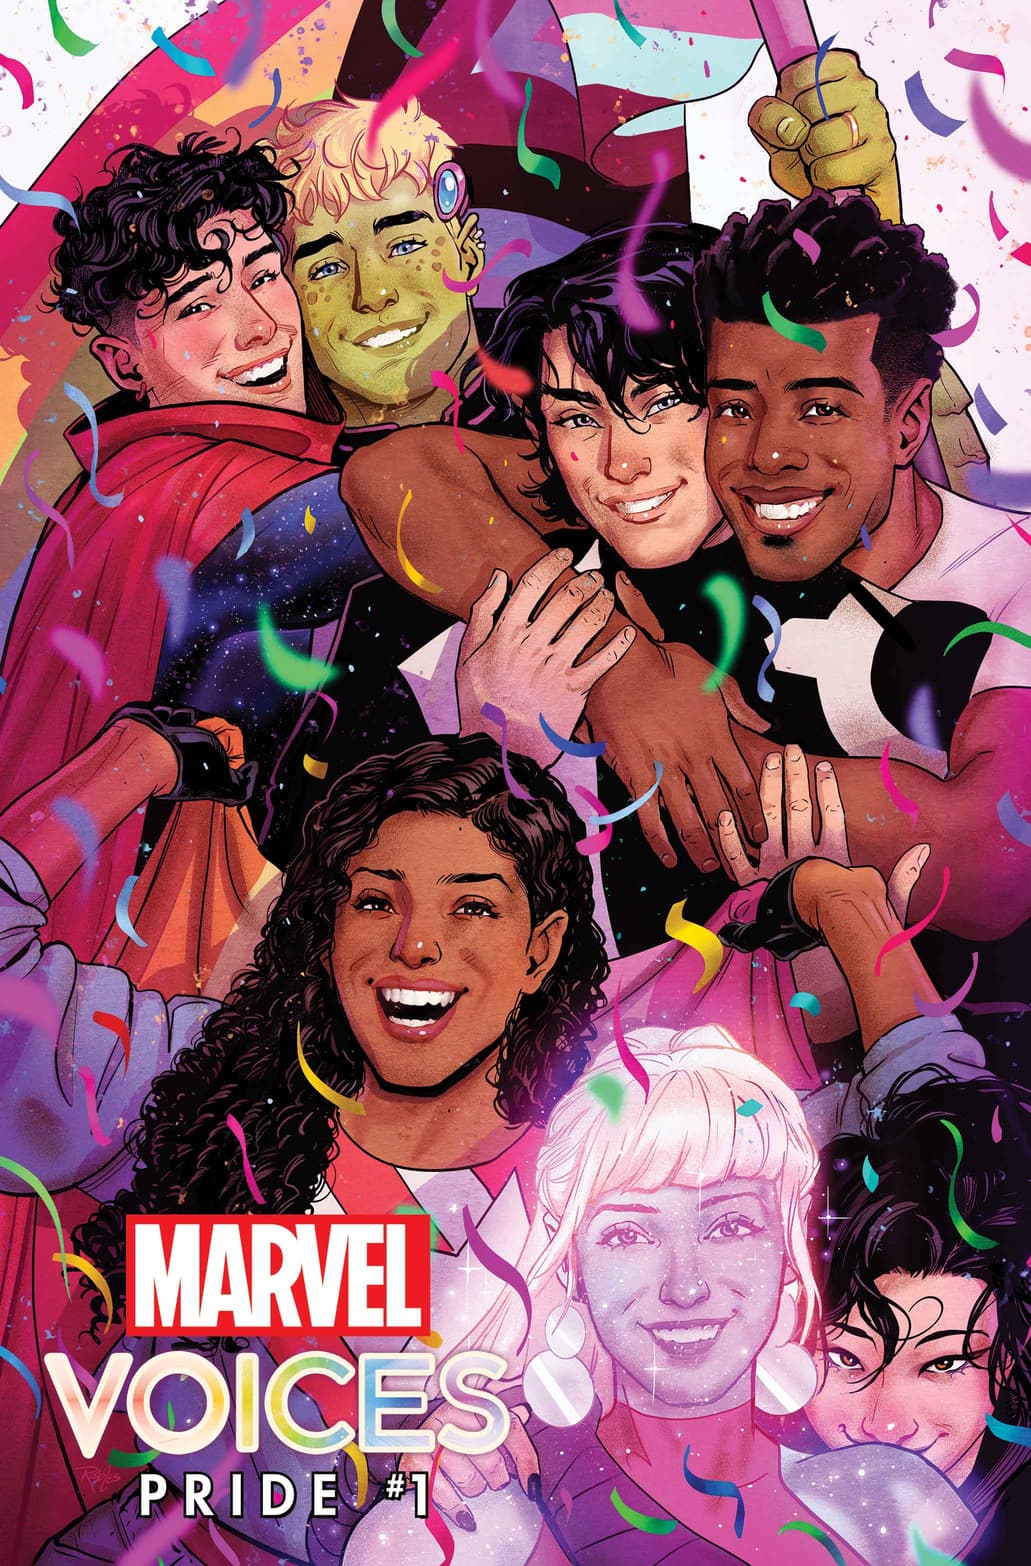 Marvel's Voices: Pride #1 cover by Nick Robles